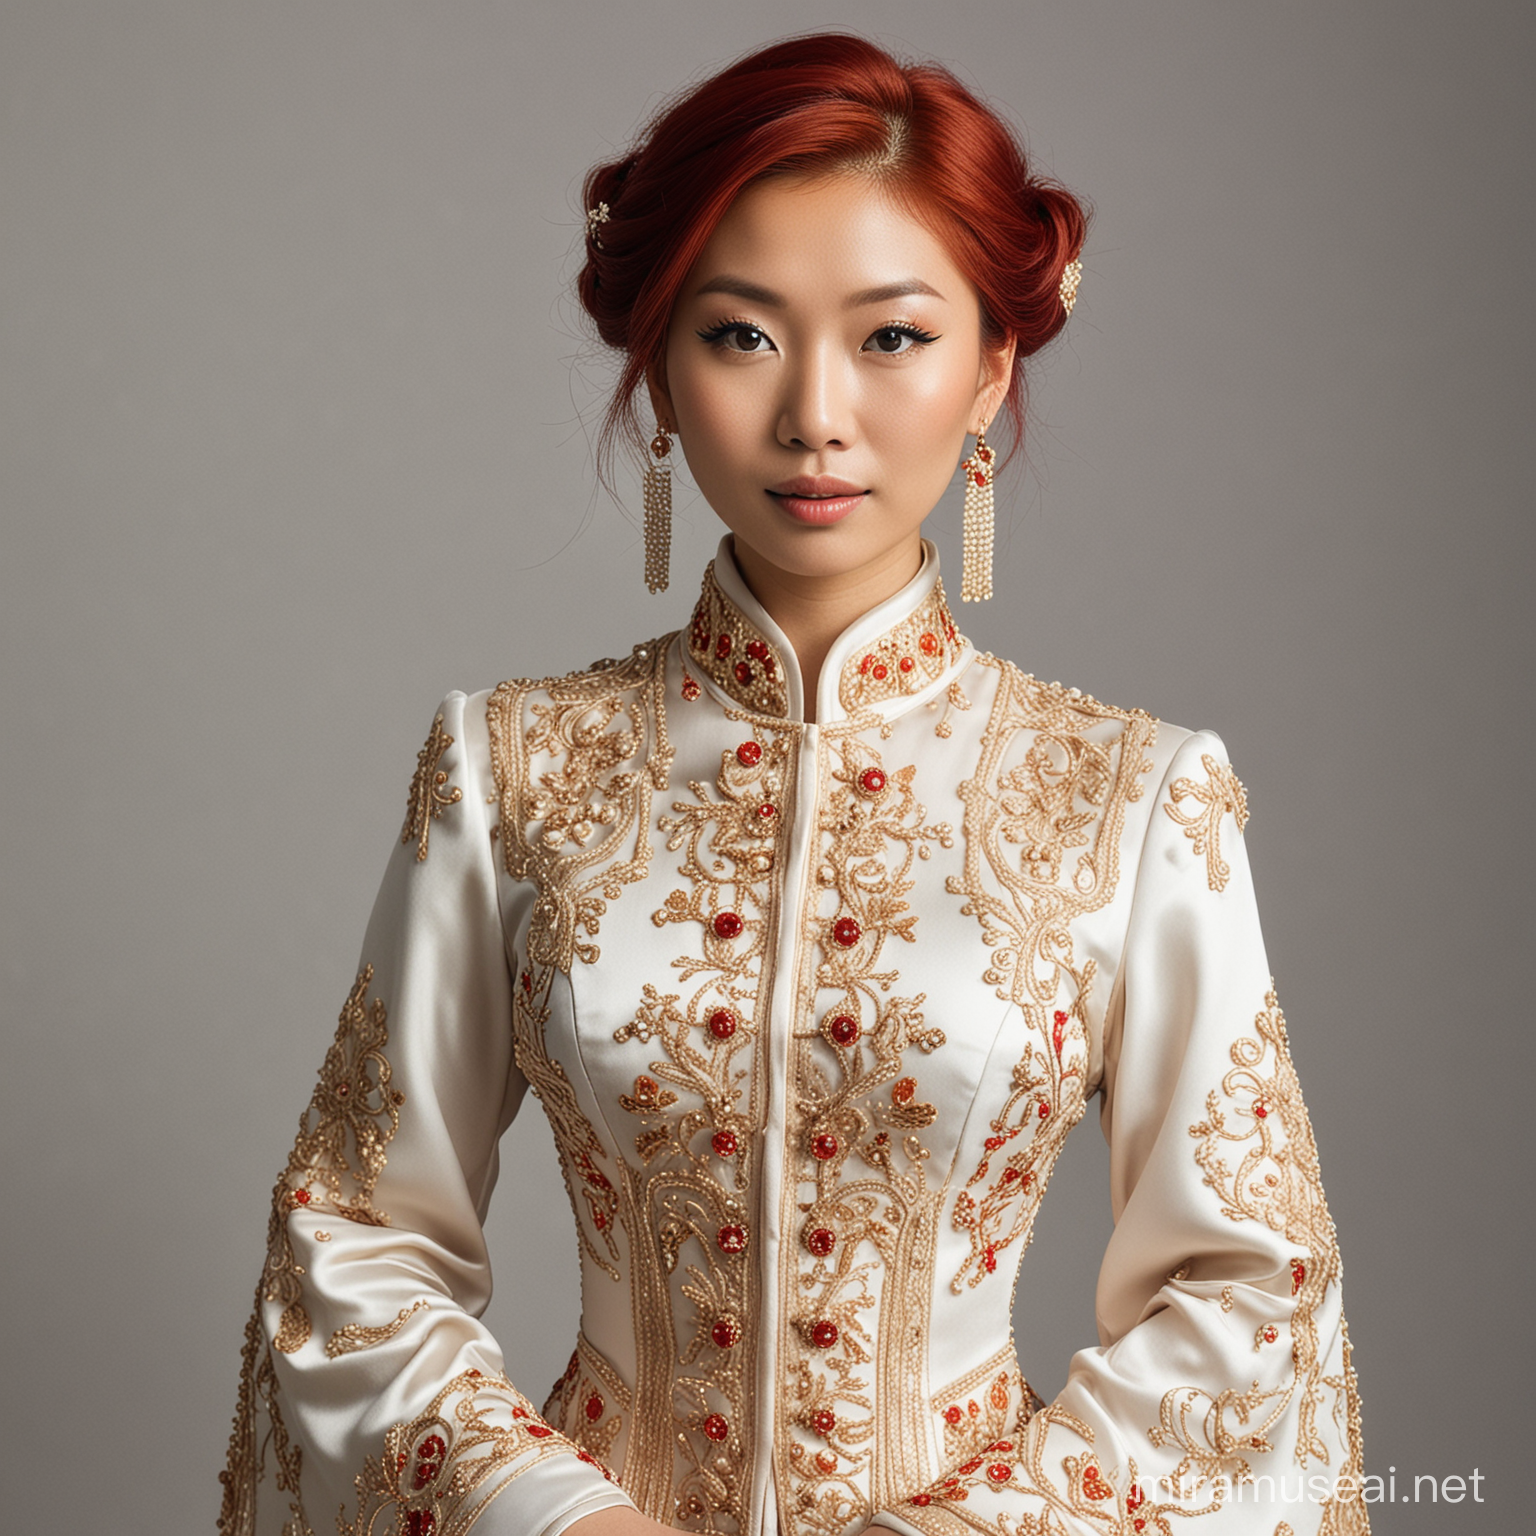 Asian woman with red hair wearing a fancy outfit